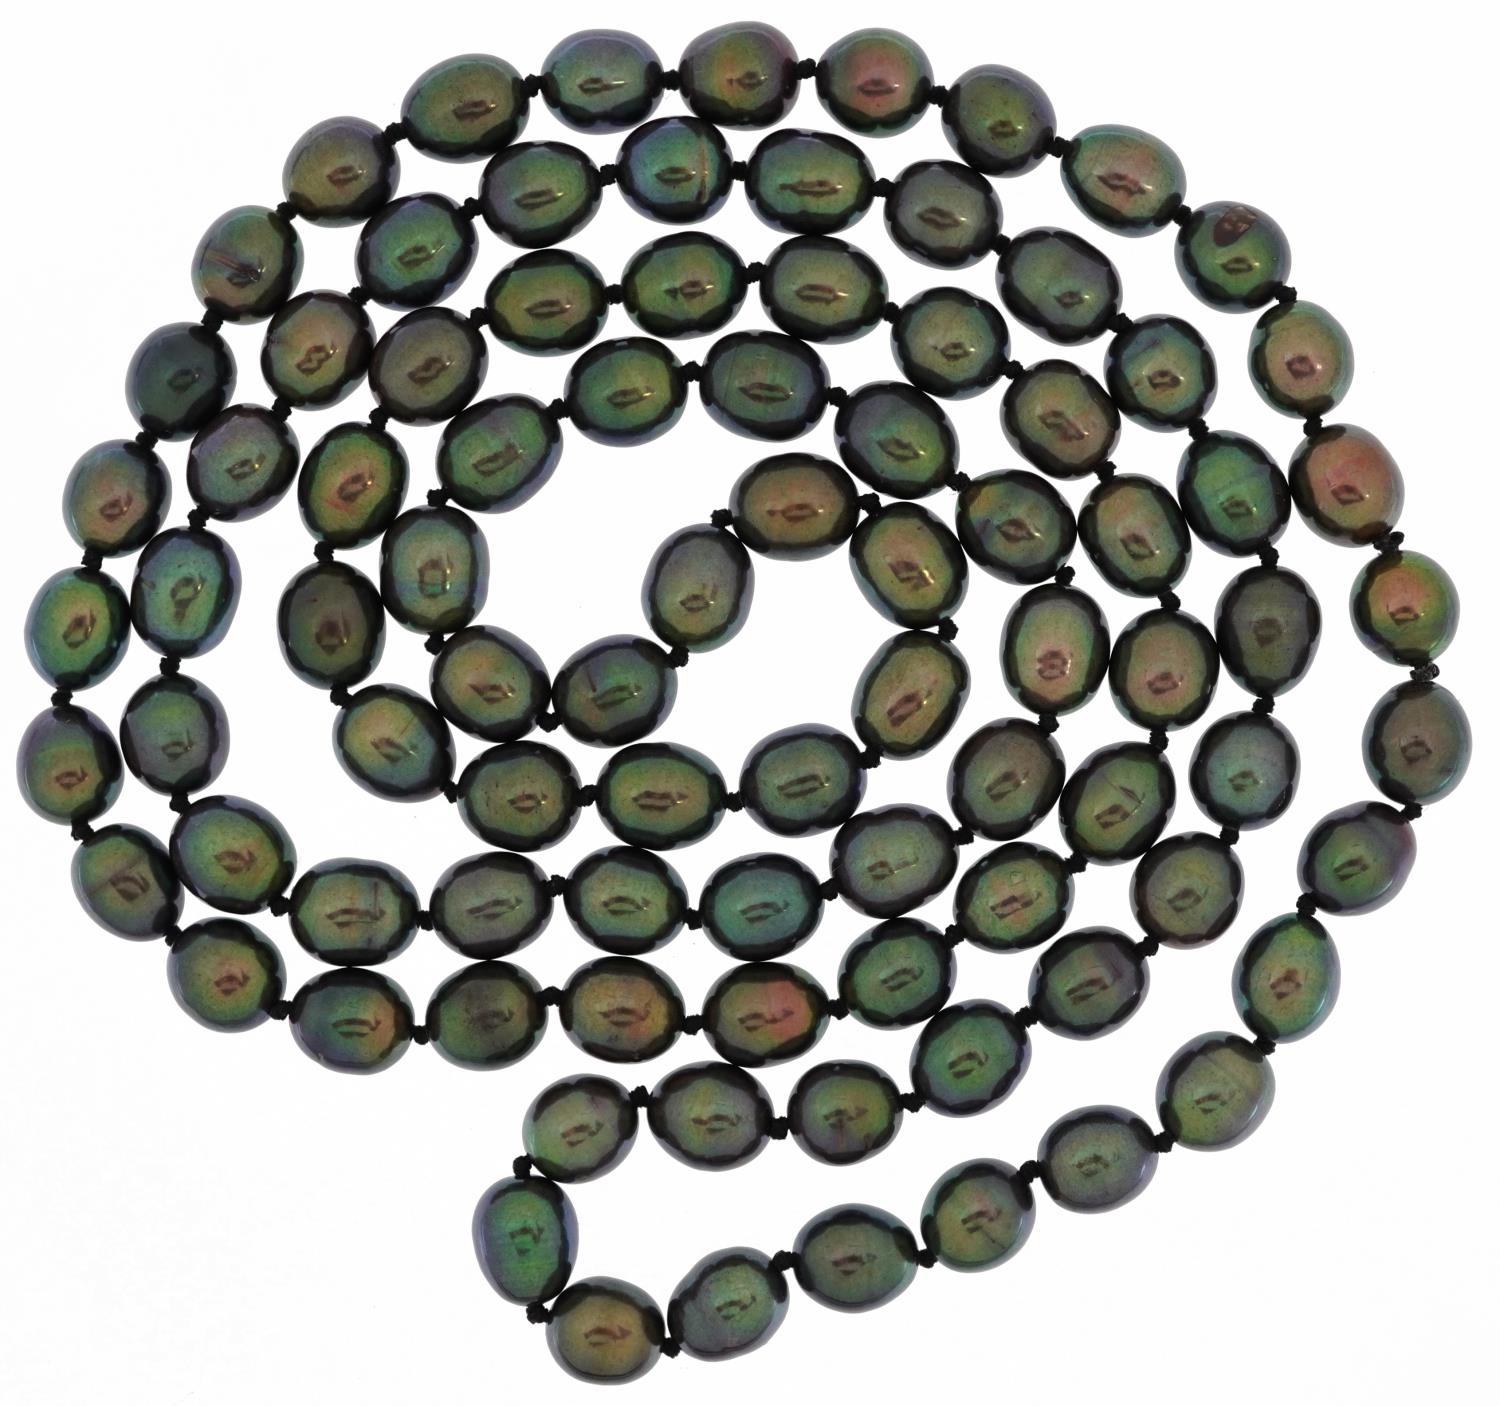 Peacock colour cultured pearl necklace, 94cm in length, 82.8g - Image 2 of 2